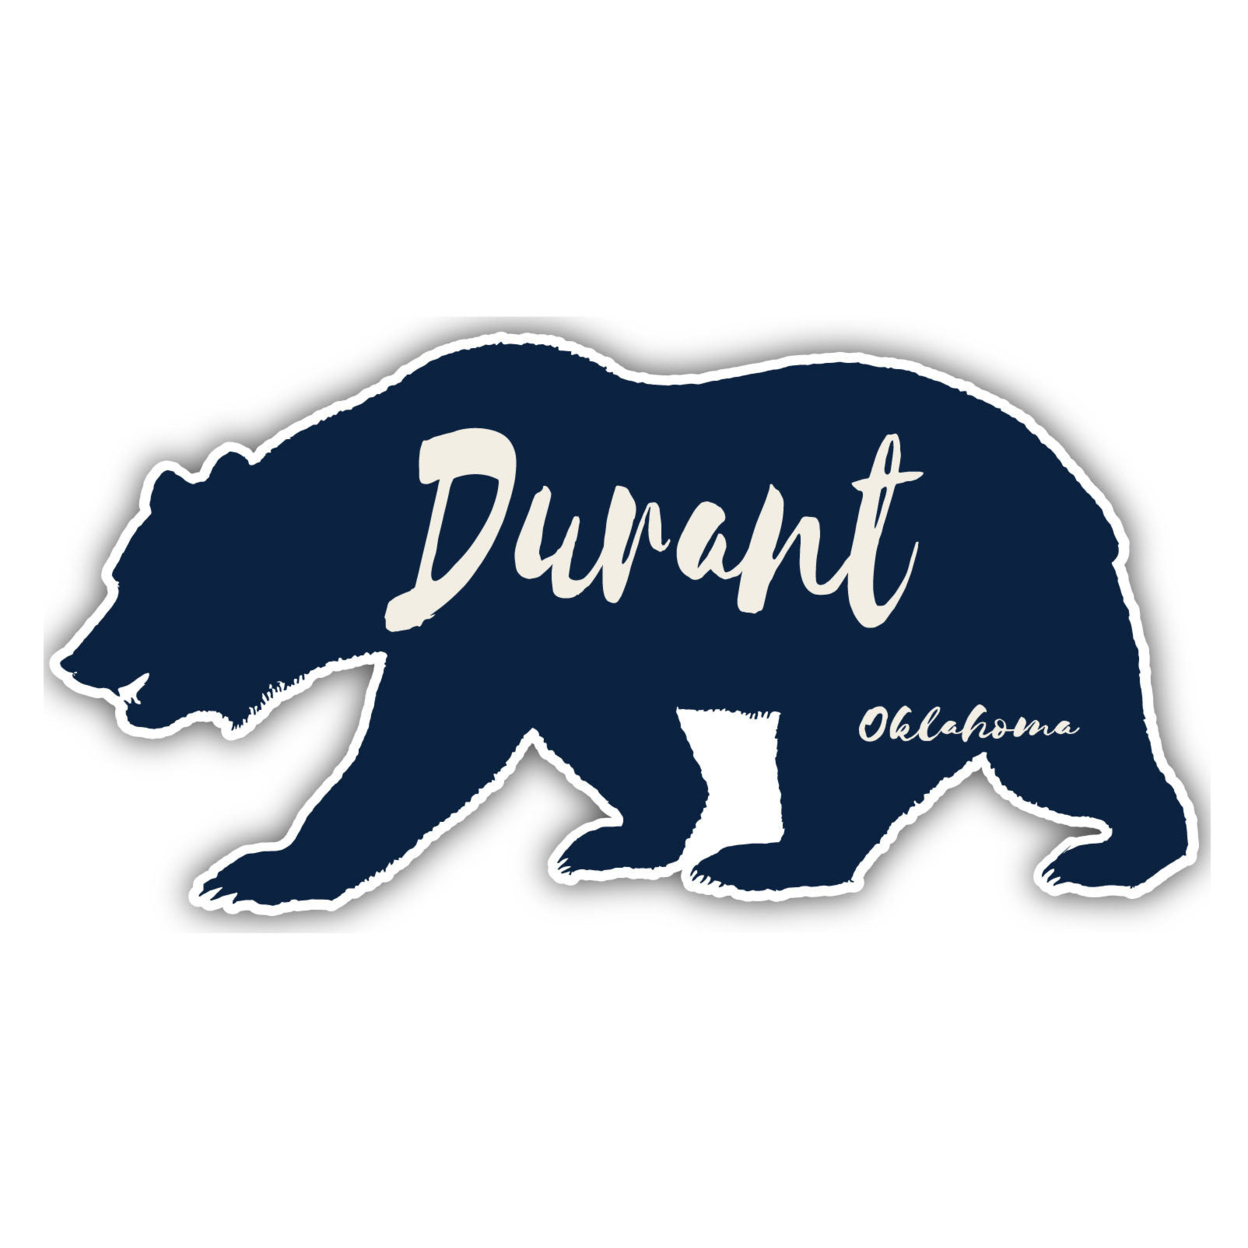 Durant Oklahoma Souvenir Decorative Stickers (Choose Theme And Size) - 4-Pack, 6-Inch, Bear